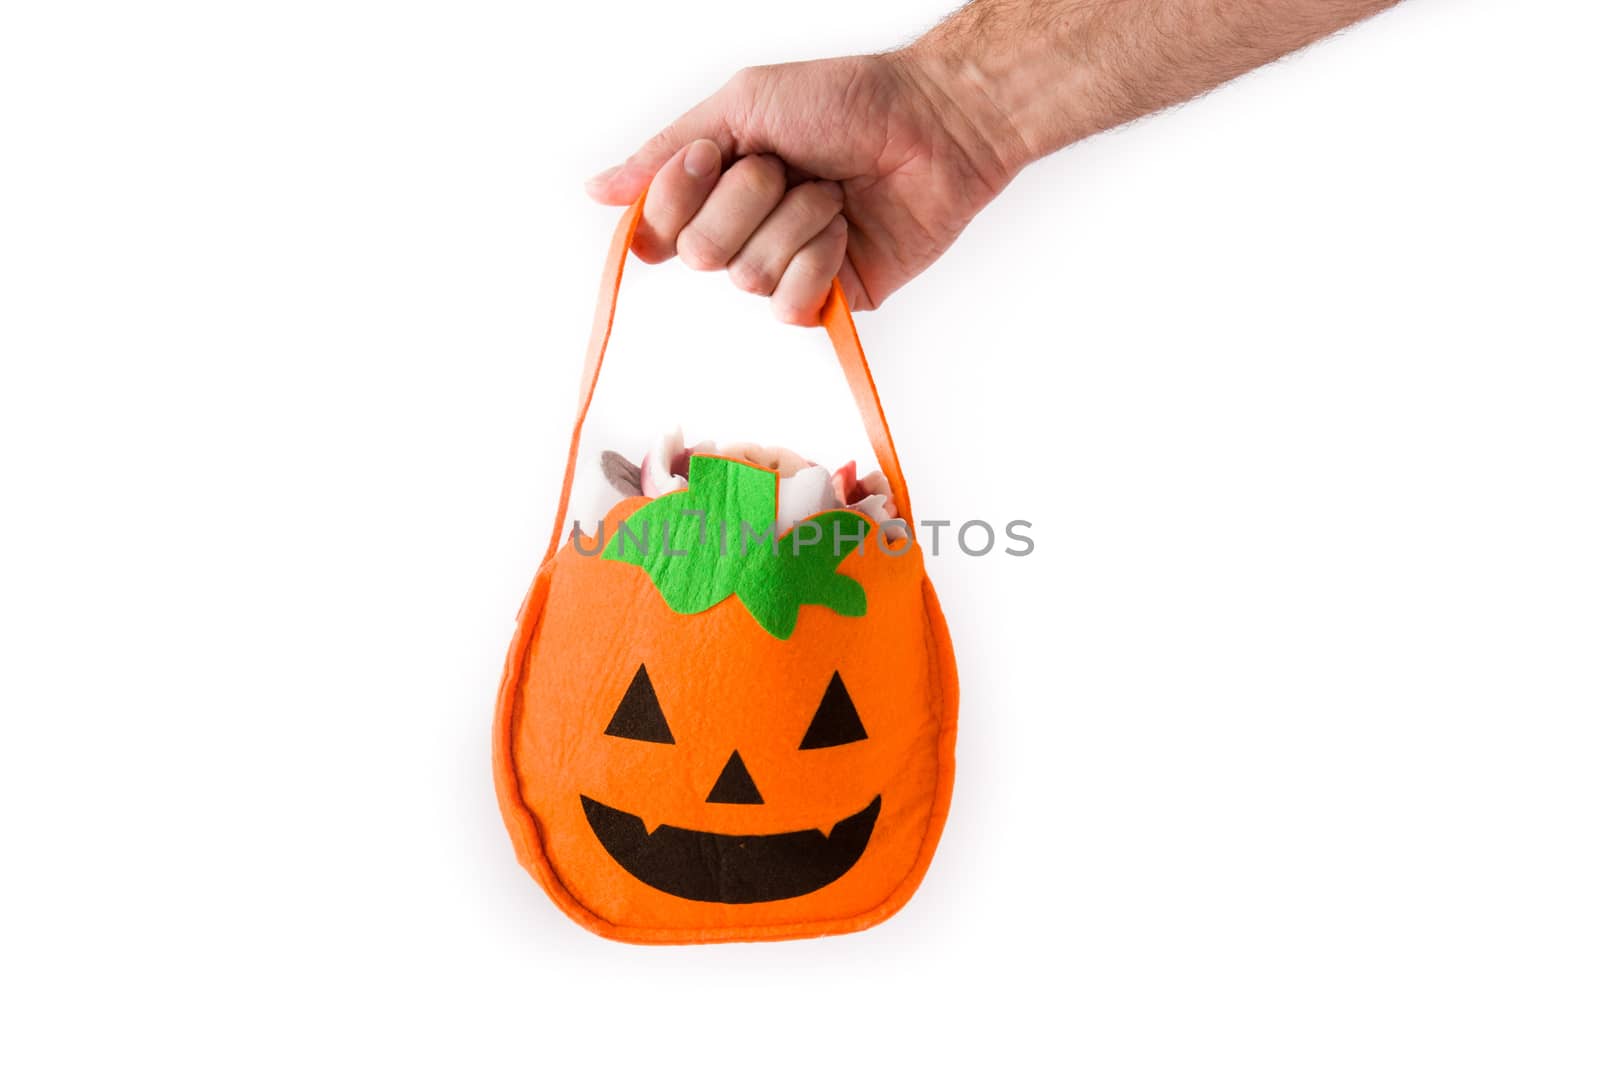 Hand holding Halloween pumpkin bag with candies inside by chandlervid85